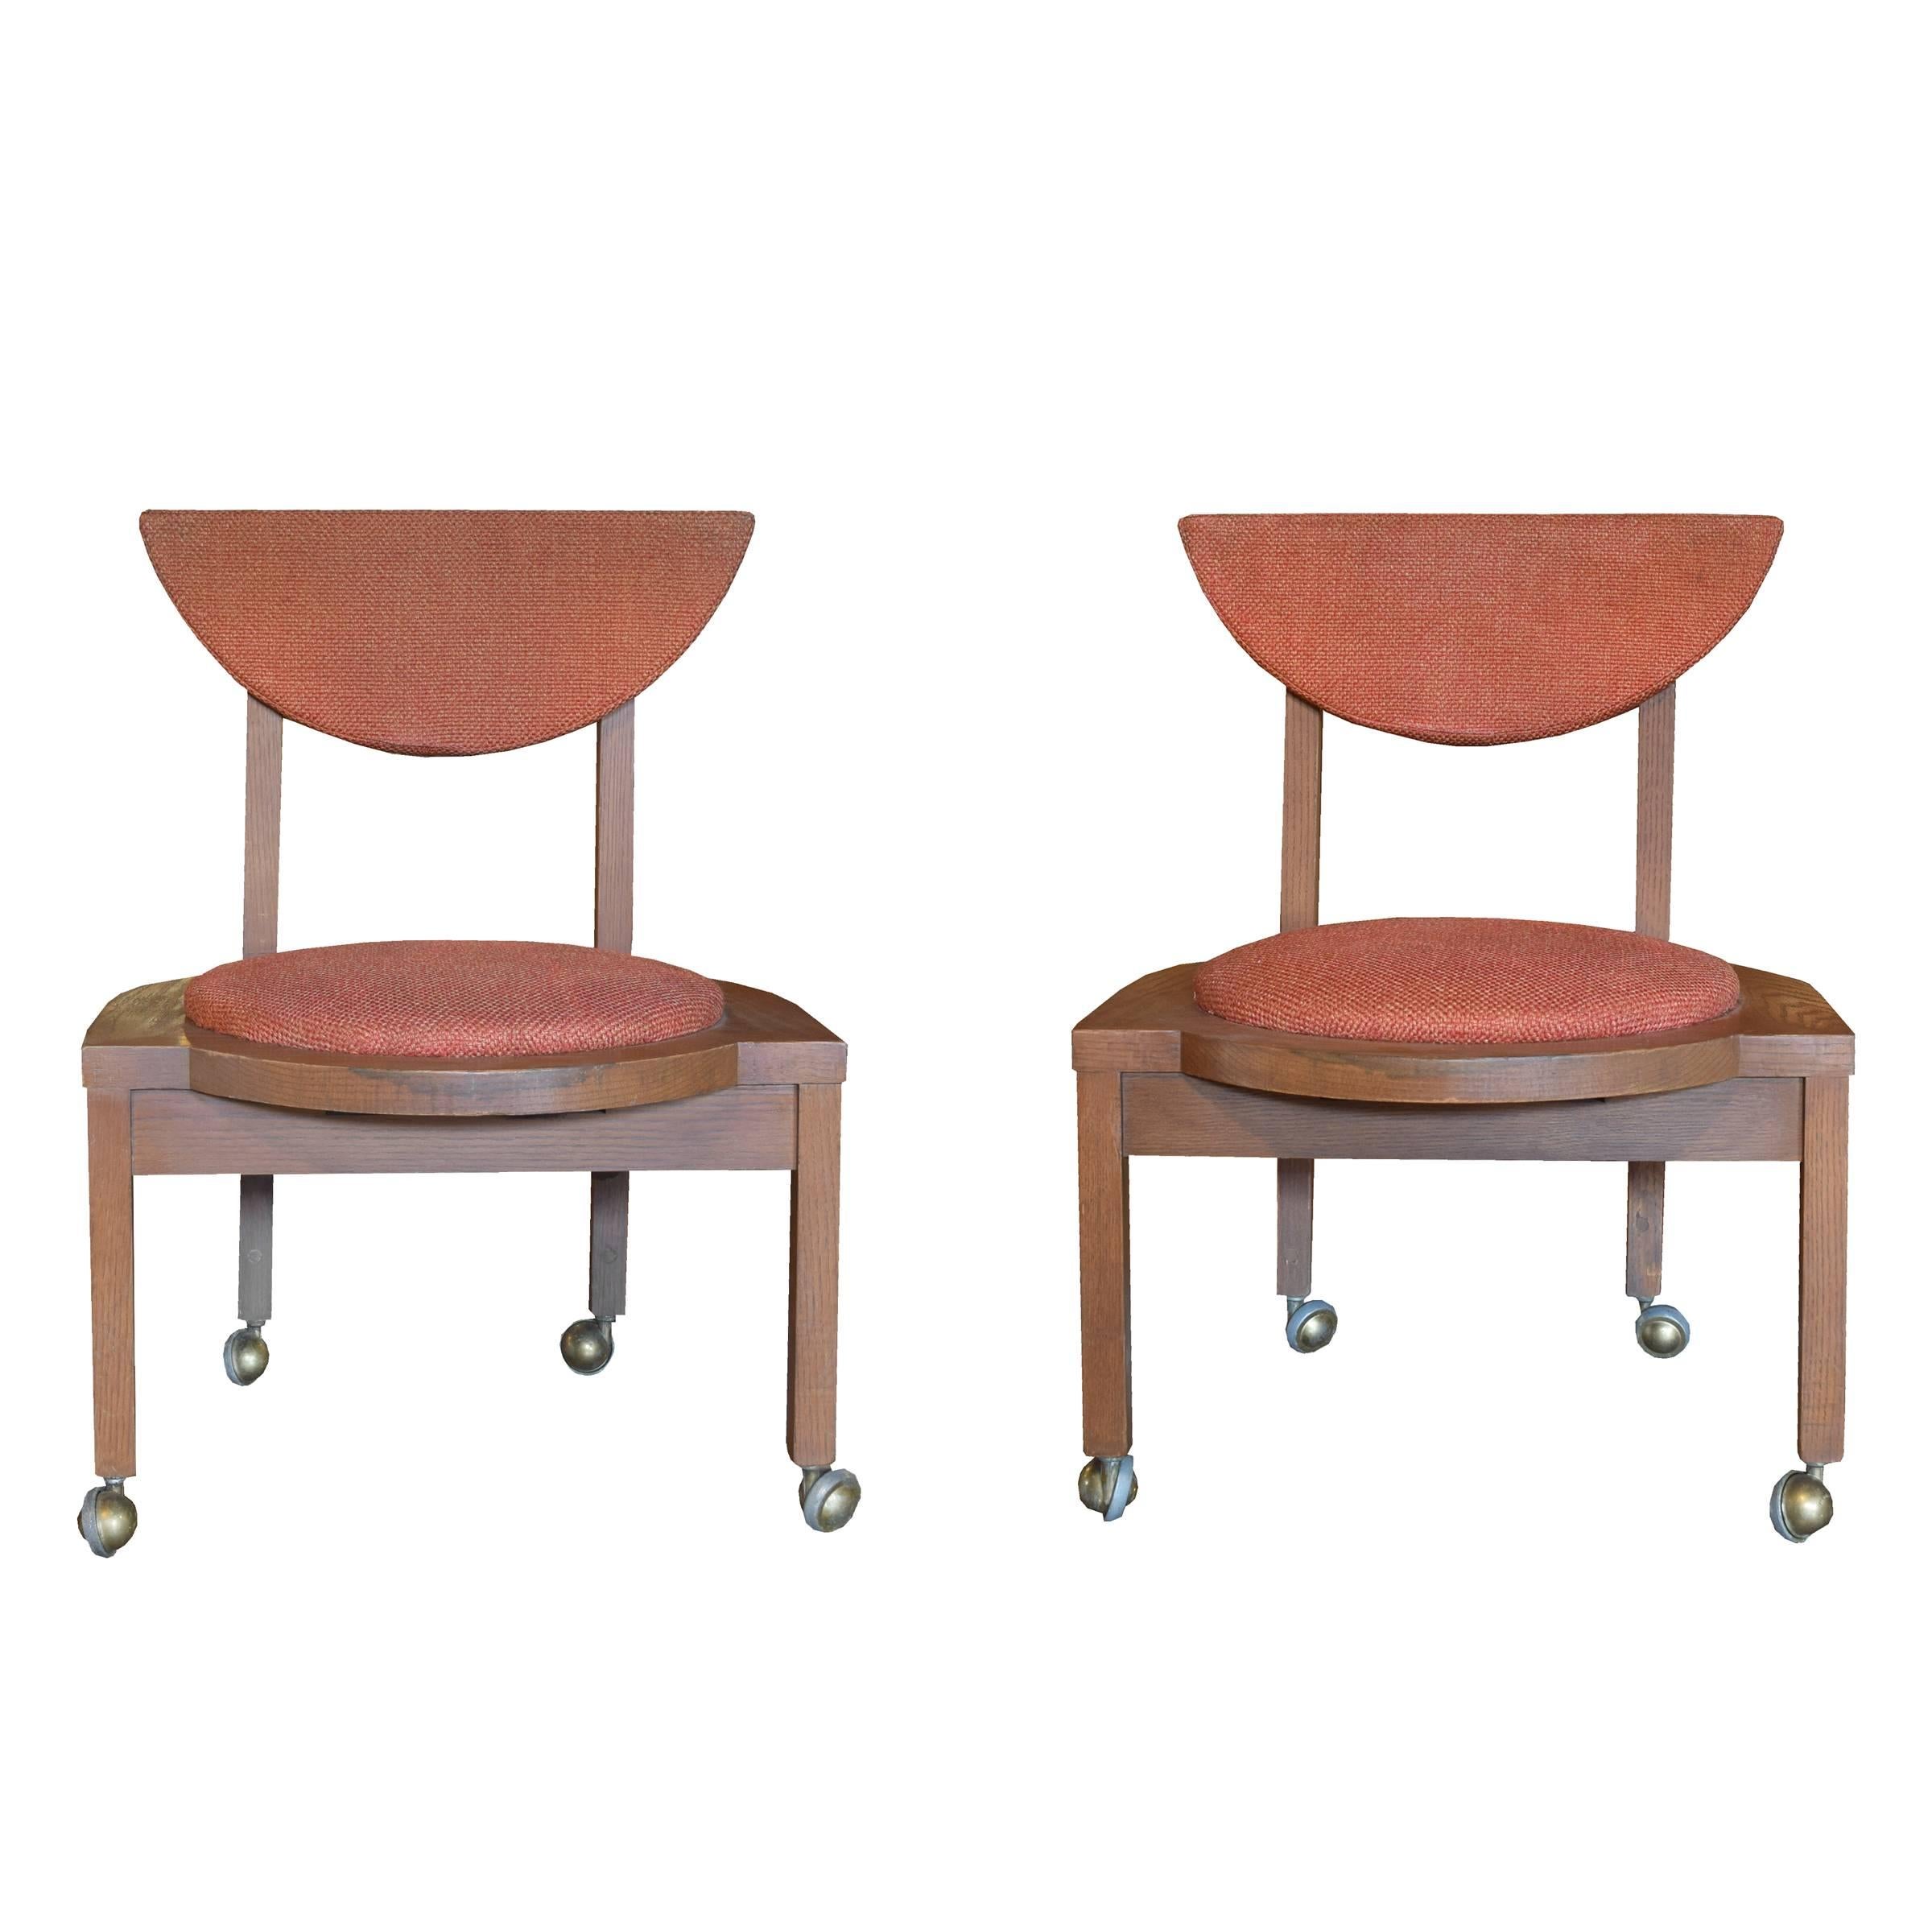 Pair of Frank Lloyd Wright Designed Side Chairs, 1953